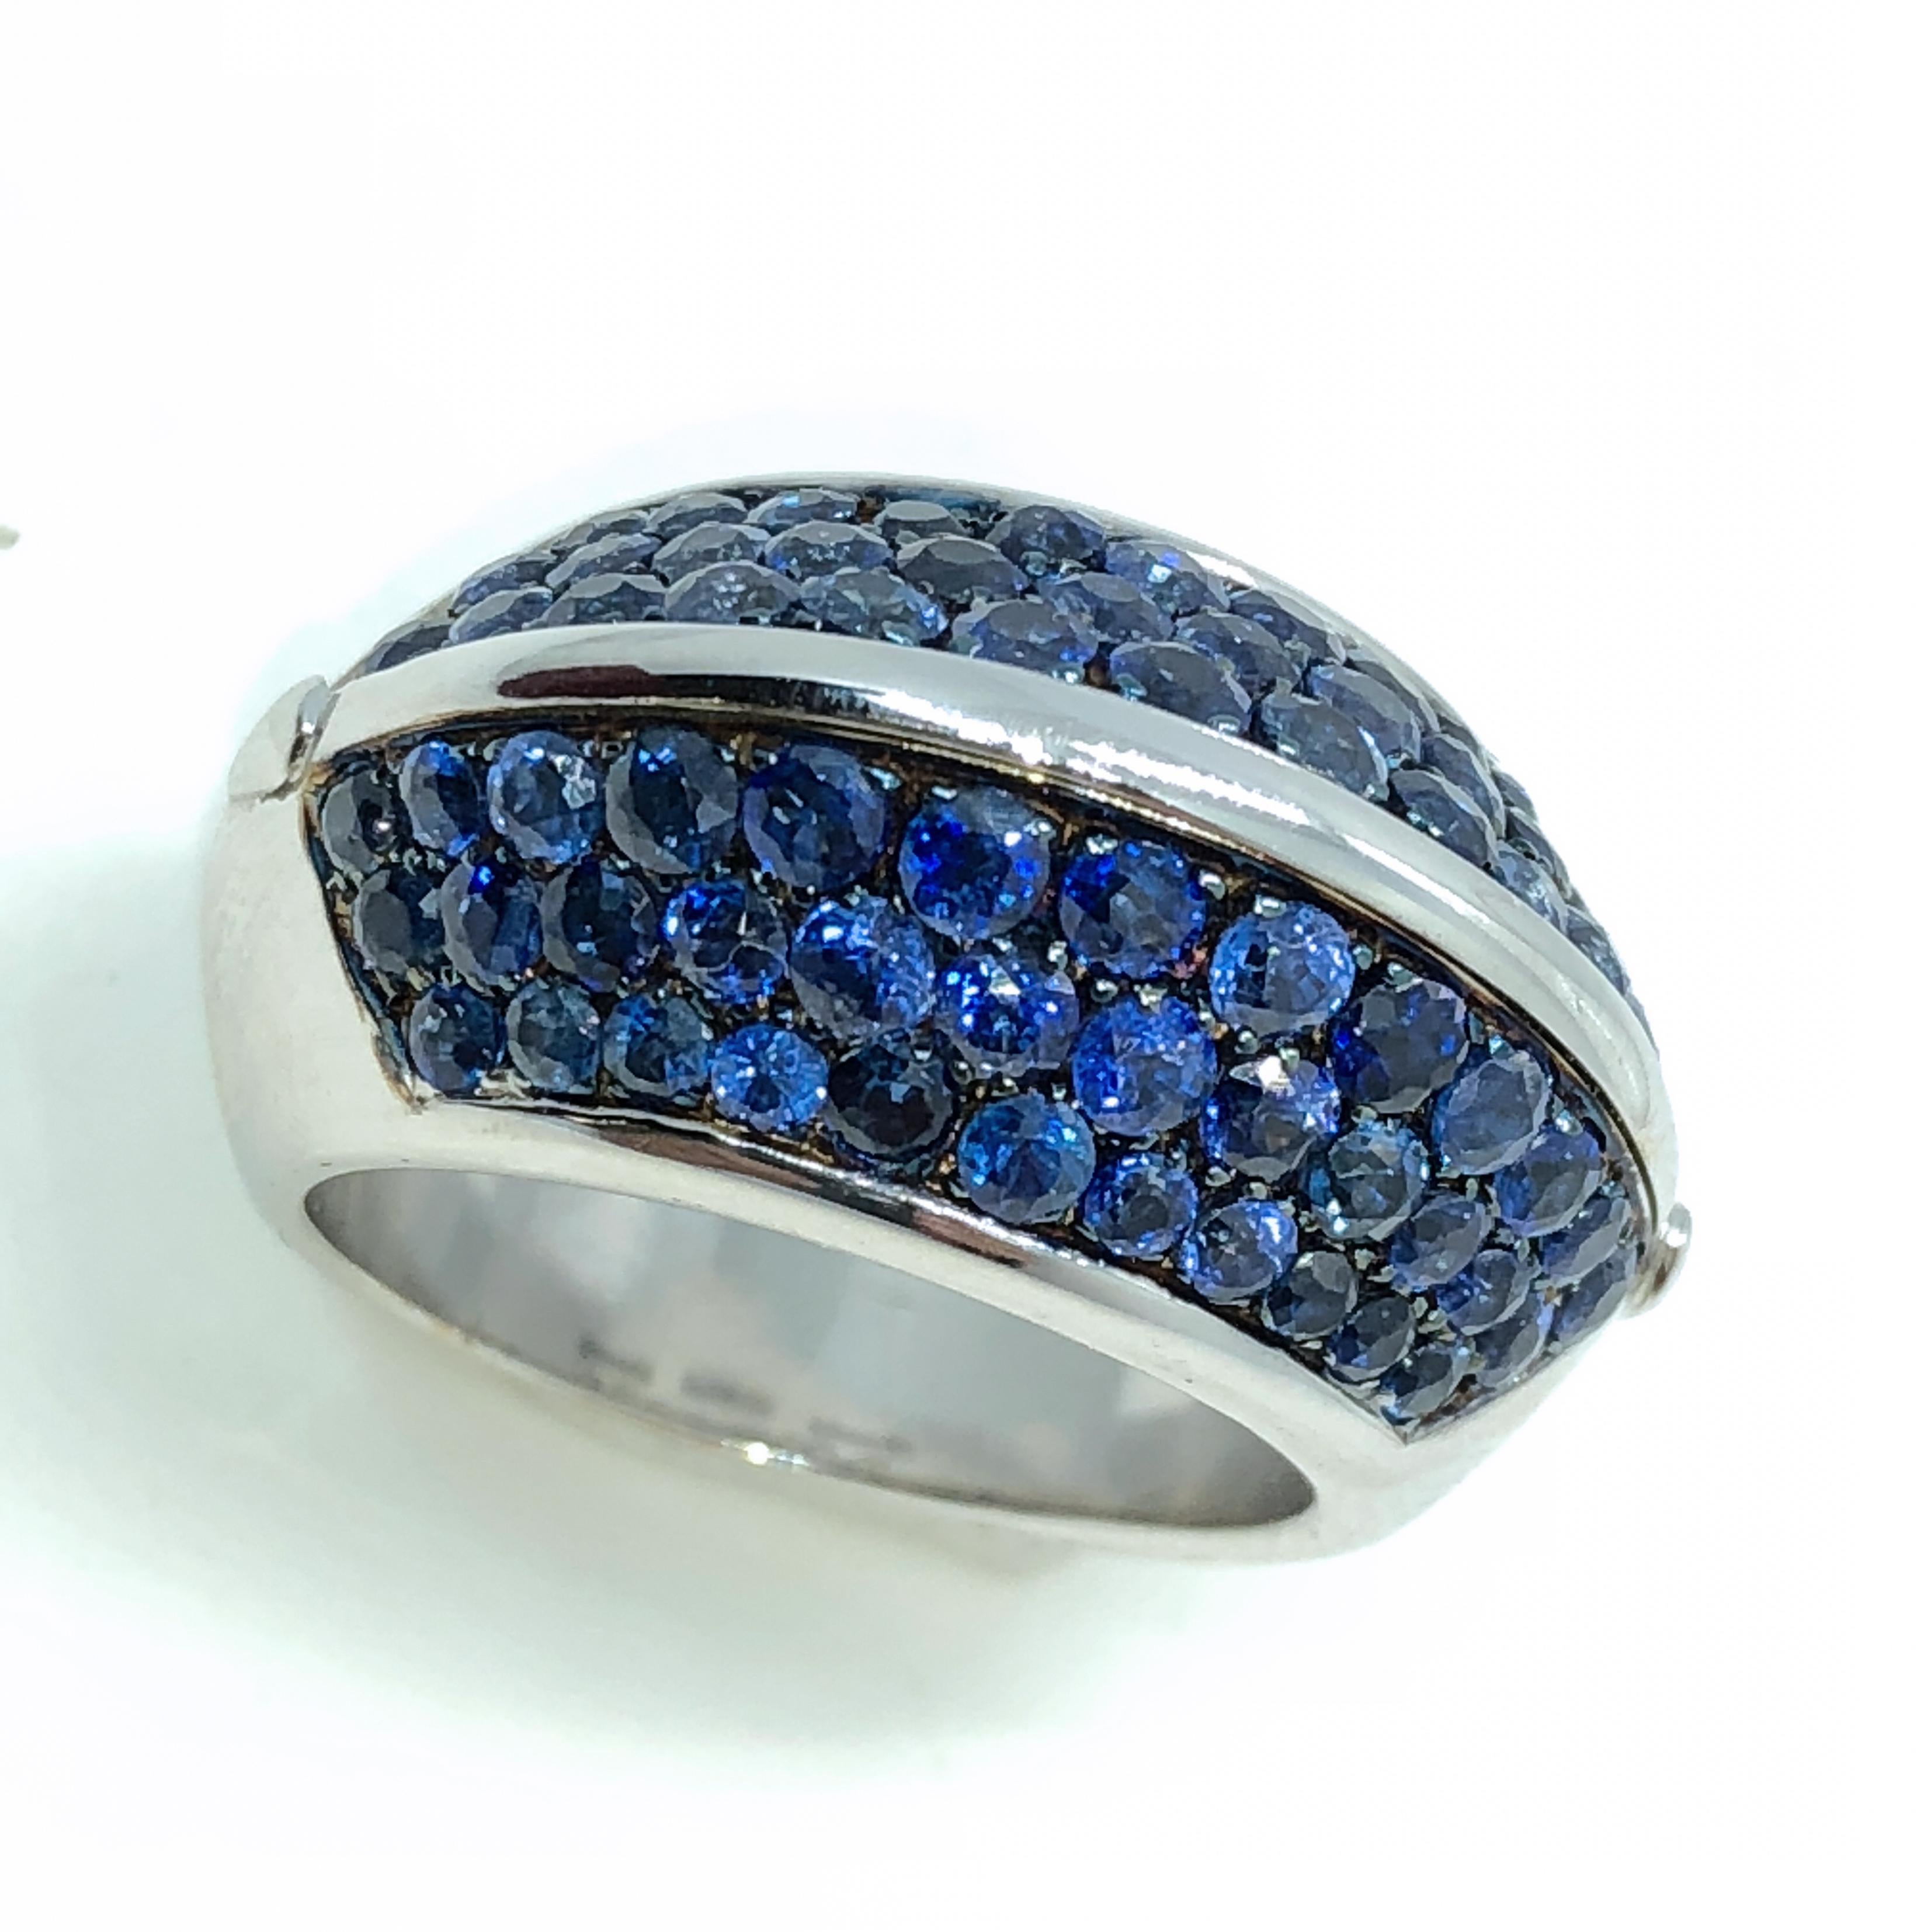 One-of-a-kind, unique yet timeless Pyramid Shaped Cocktail Ring Featuring 5.10 Carat Natural Blue Sapphire in an 18K White and Black Gold Setting: the magic of blue sapphires pavé is enhanced by glittering black gold.
In our fitted suede dark brown